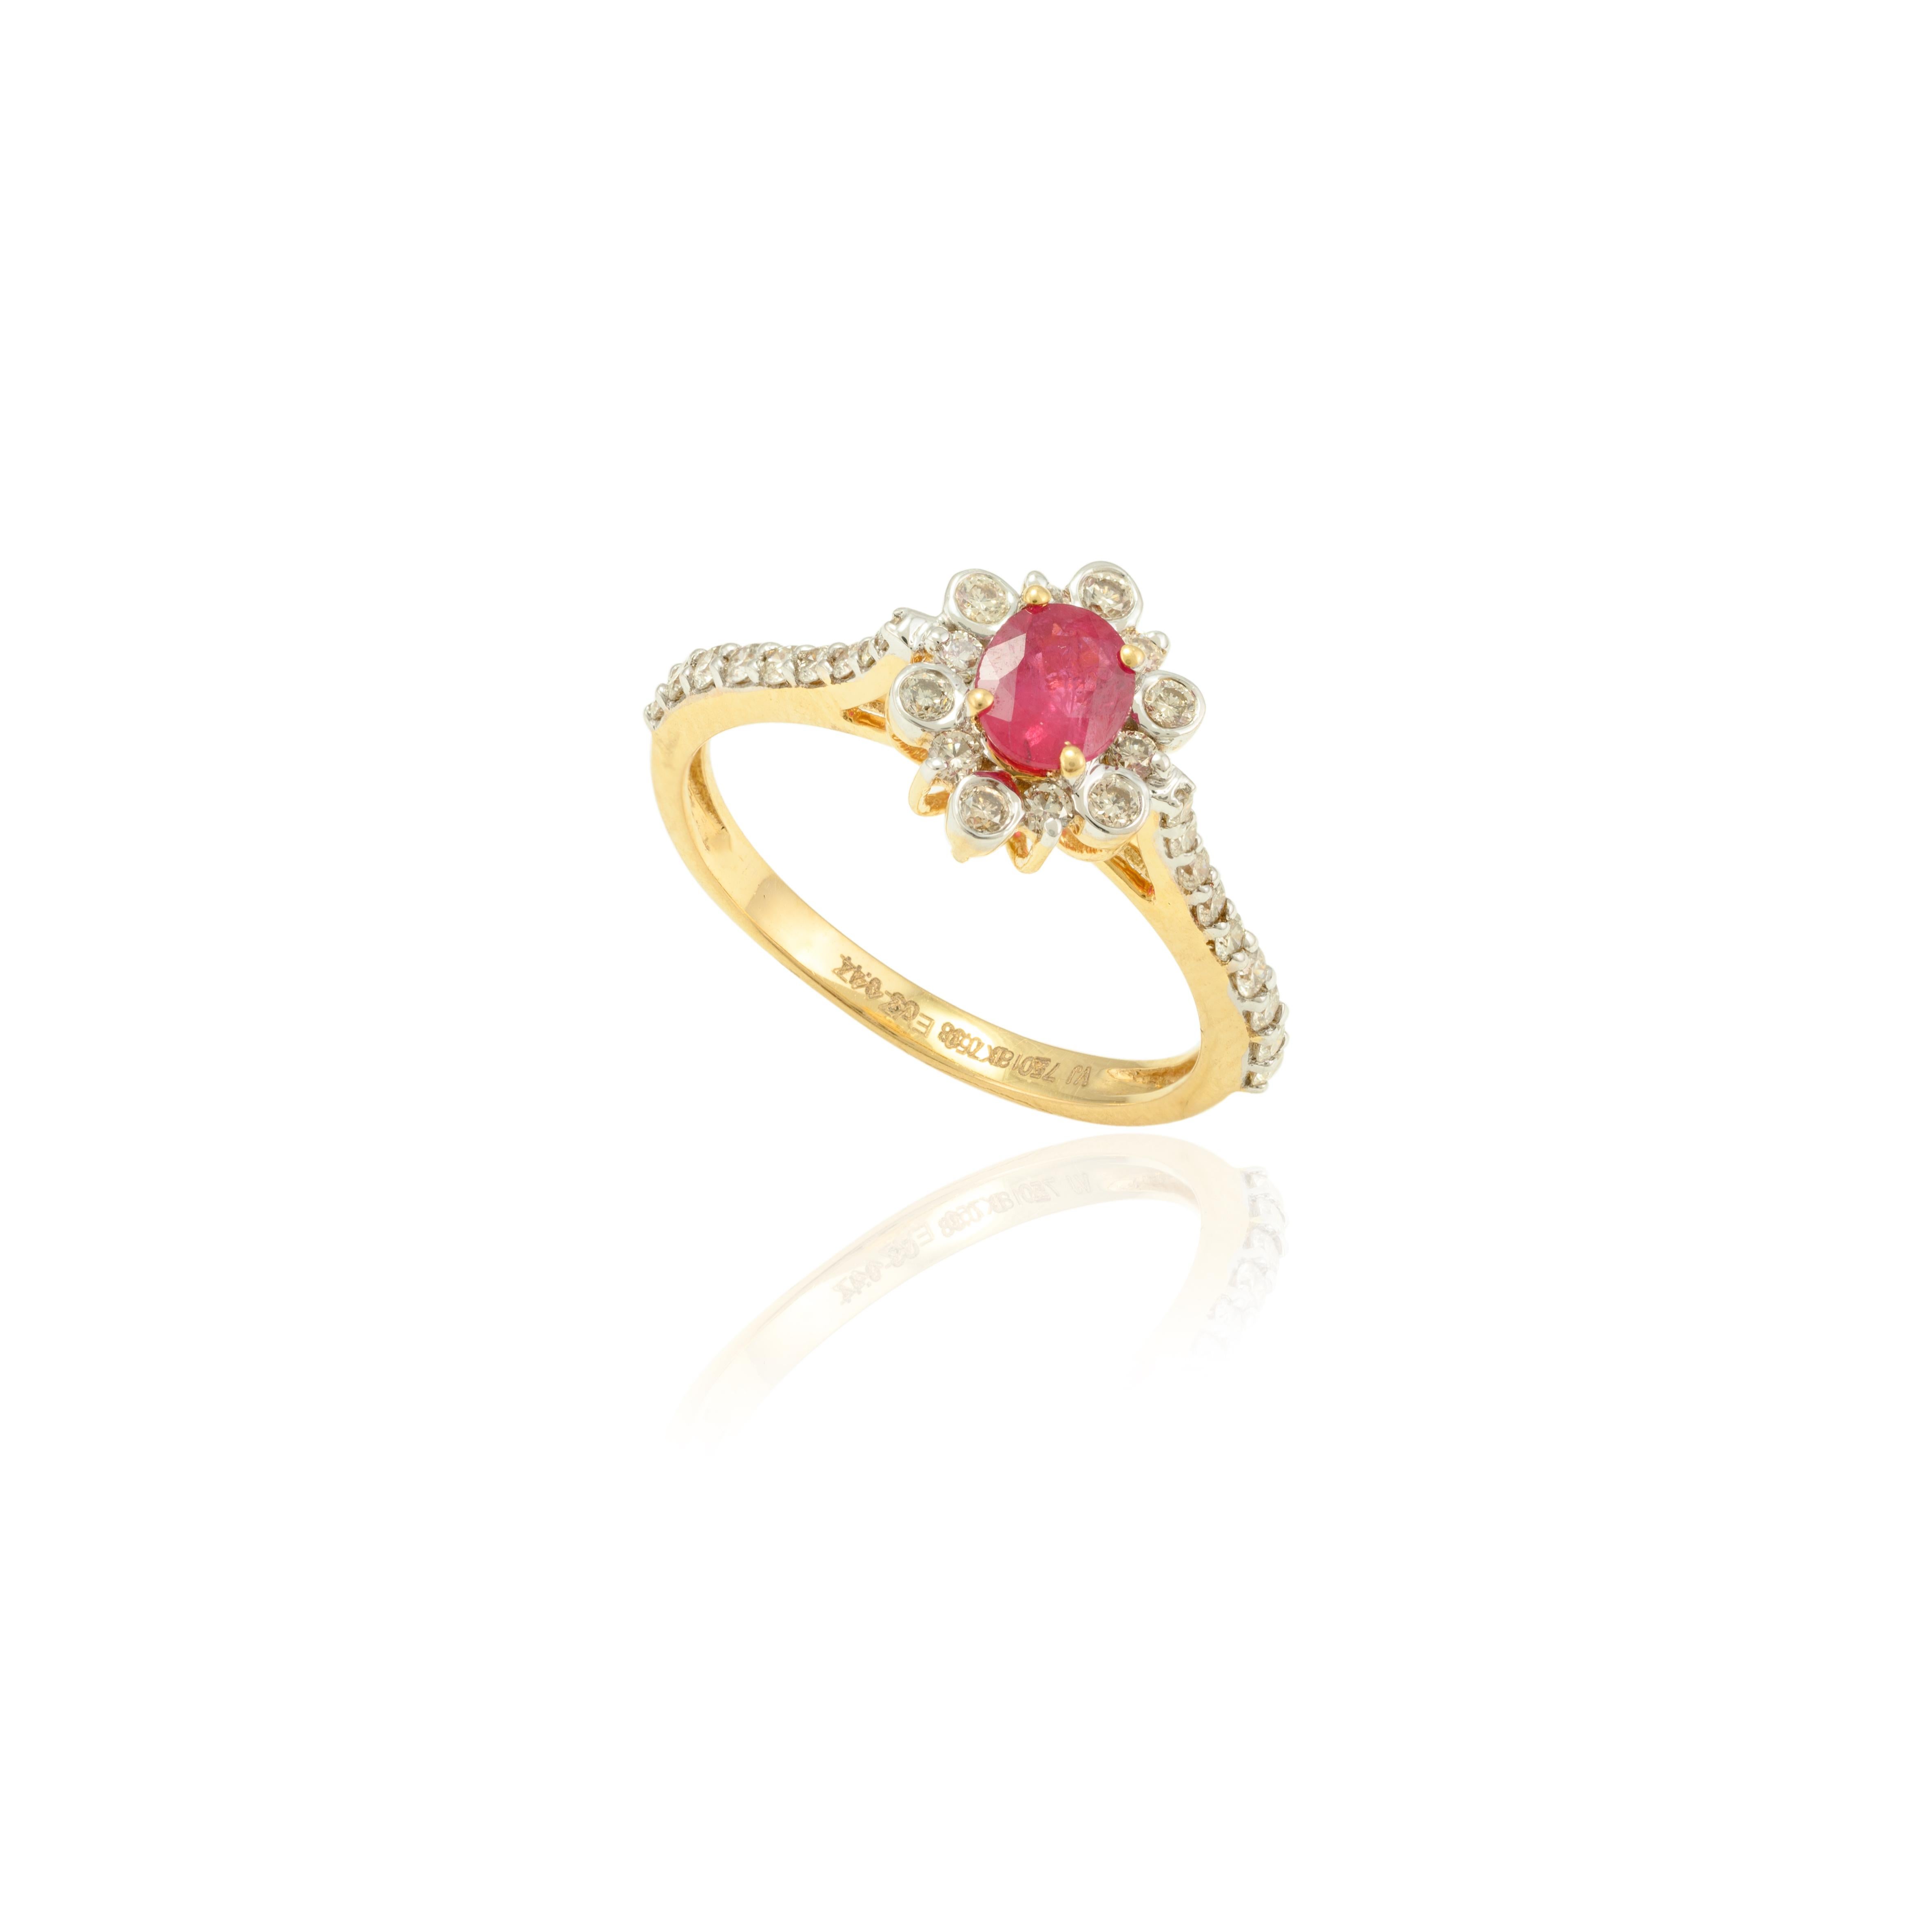 For Sale:  Contemporary Diamond and Natural Ruby Gemstone Ring in 18k Solid Yellow Gold 5